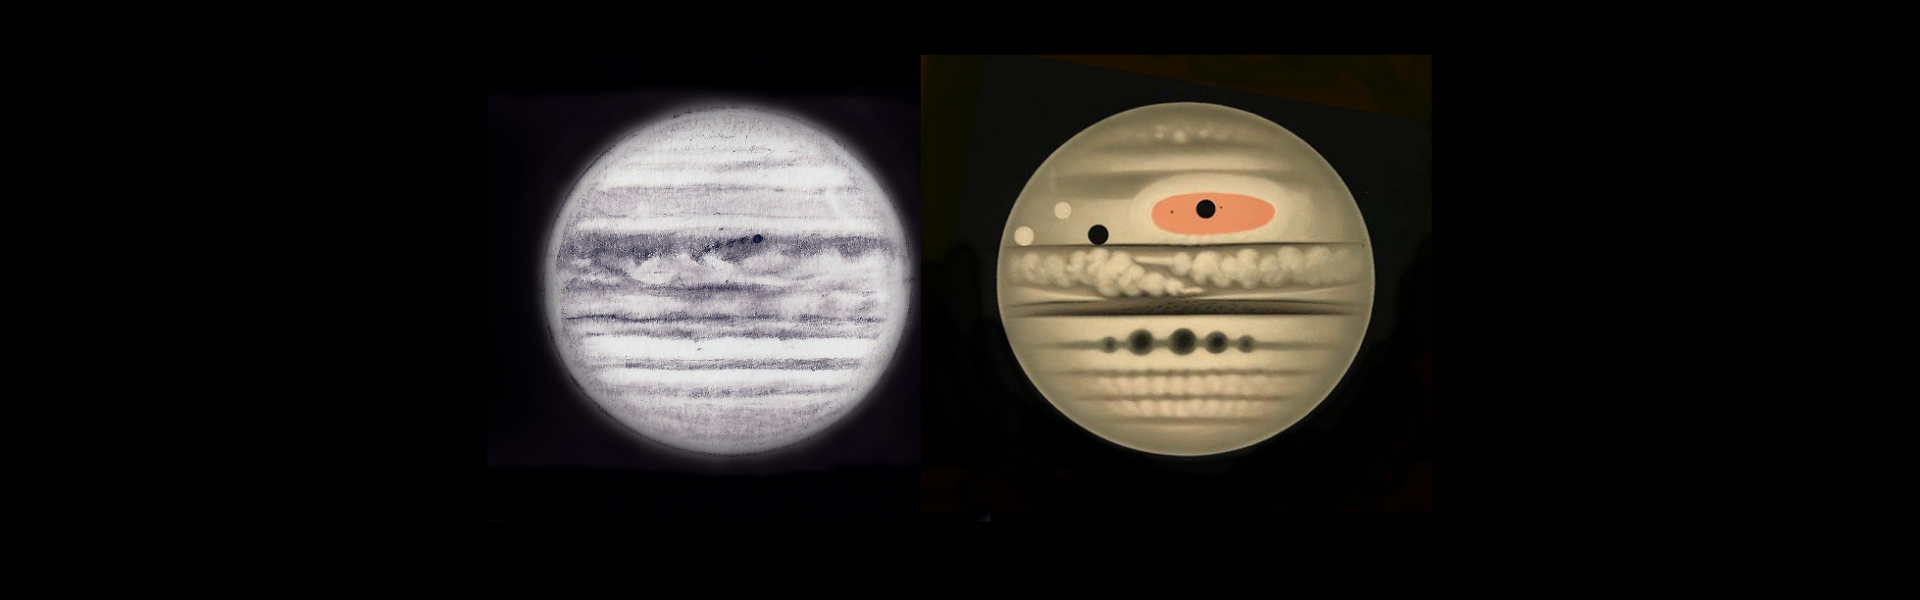 Étienne Trouvelot's images of Jupiter in 1877 and 1880